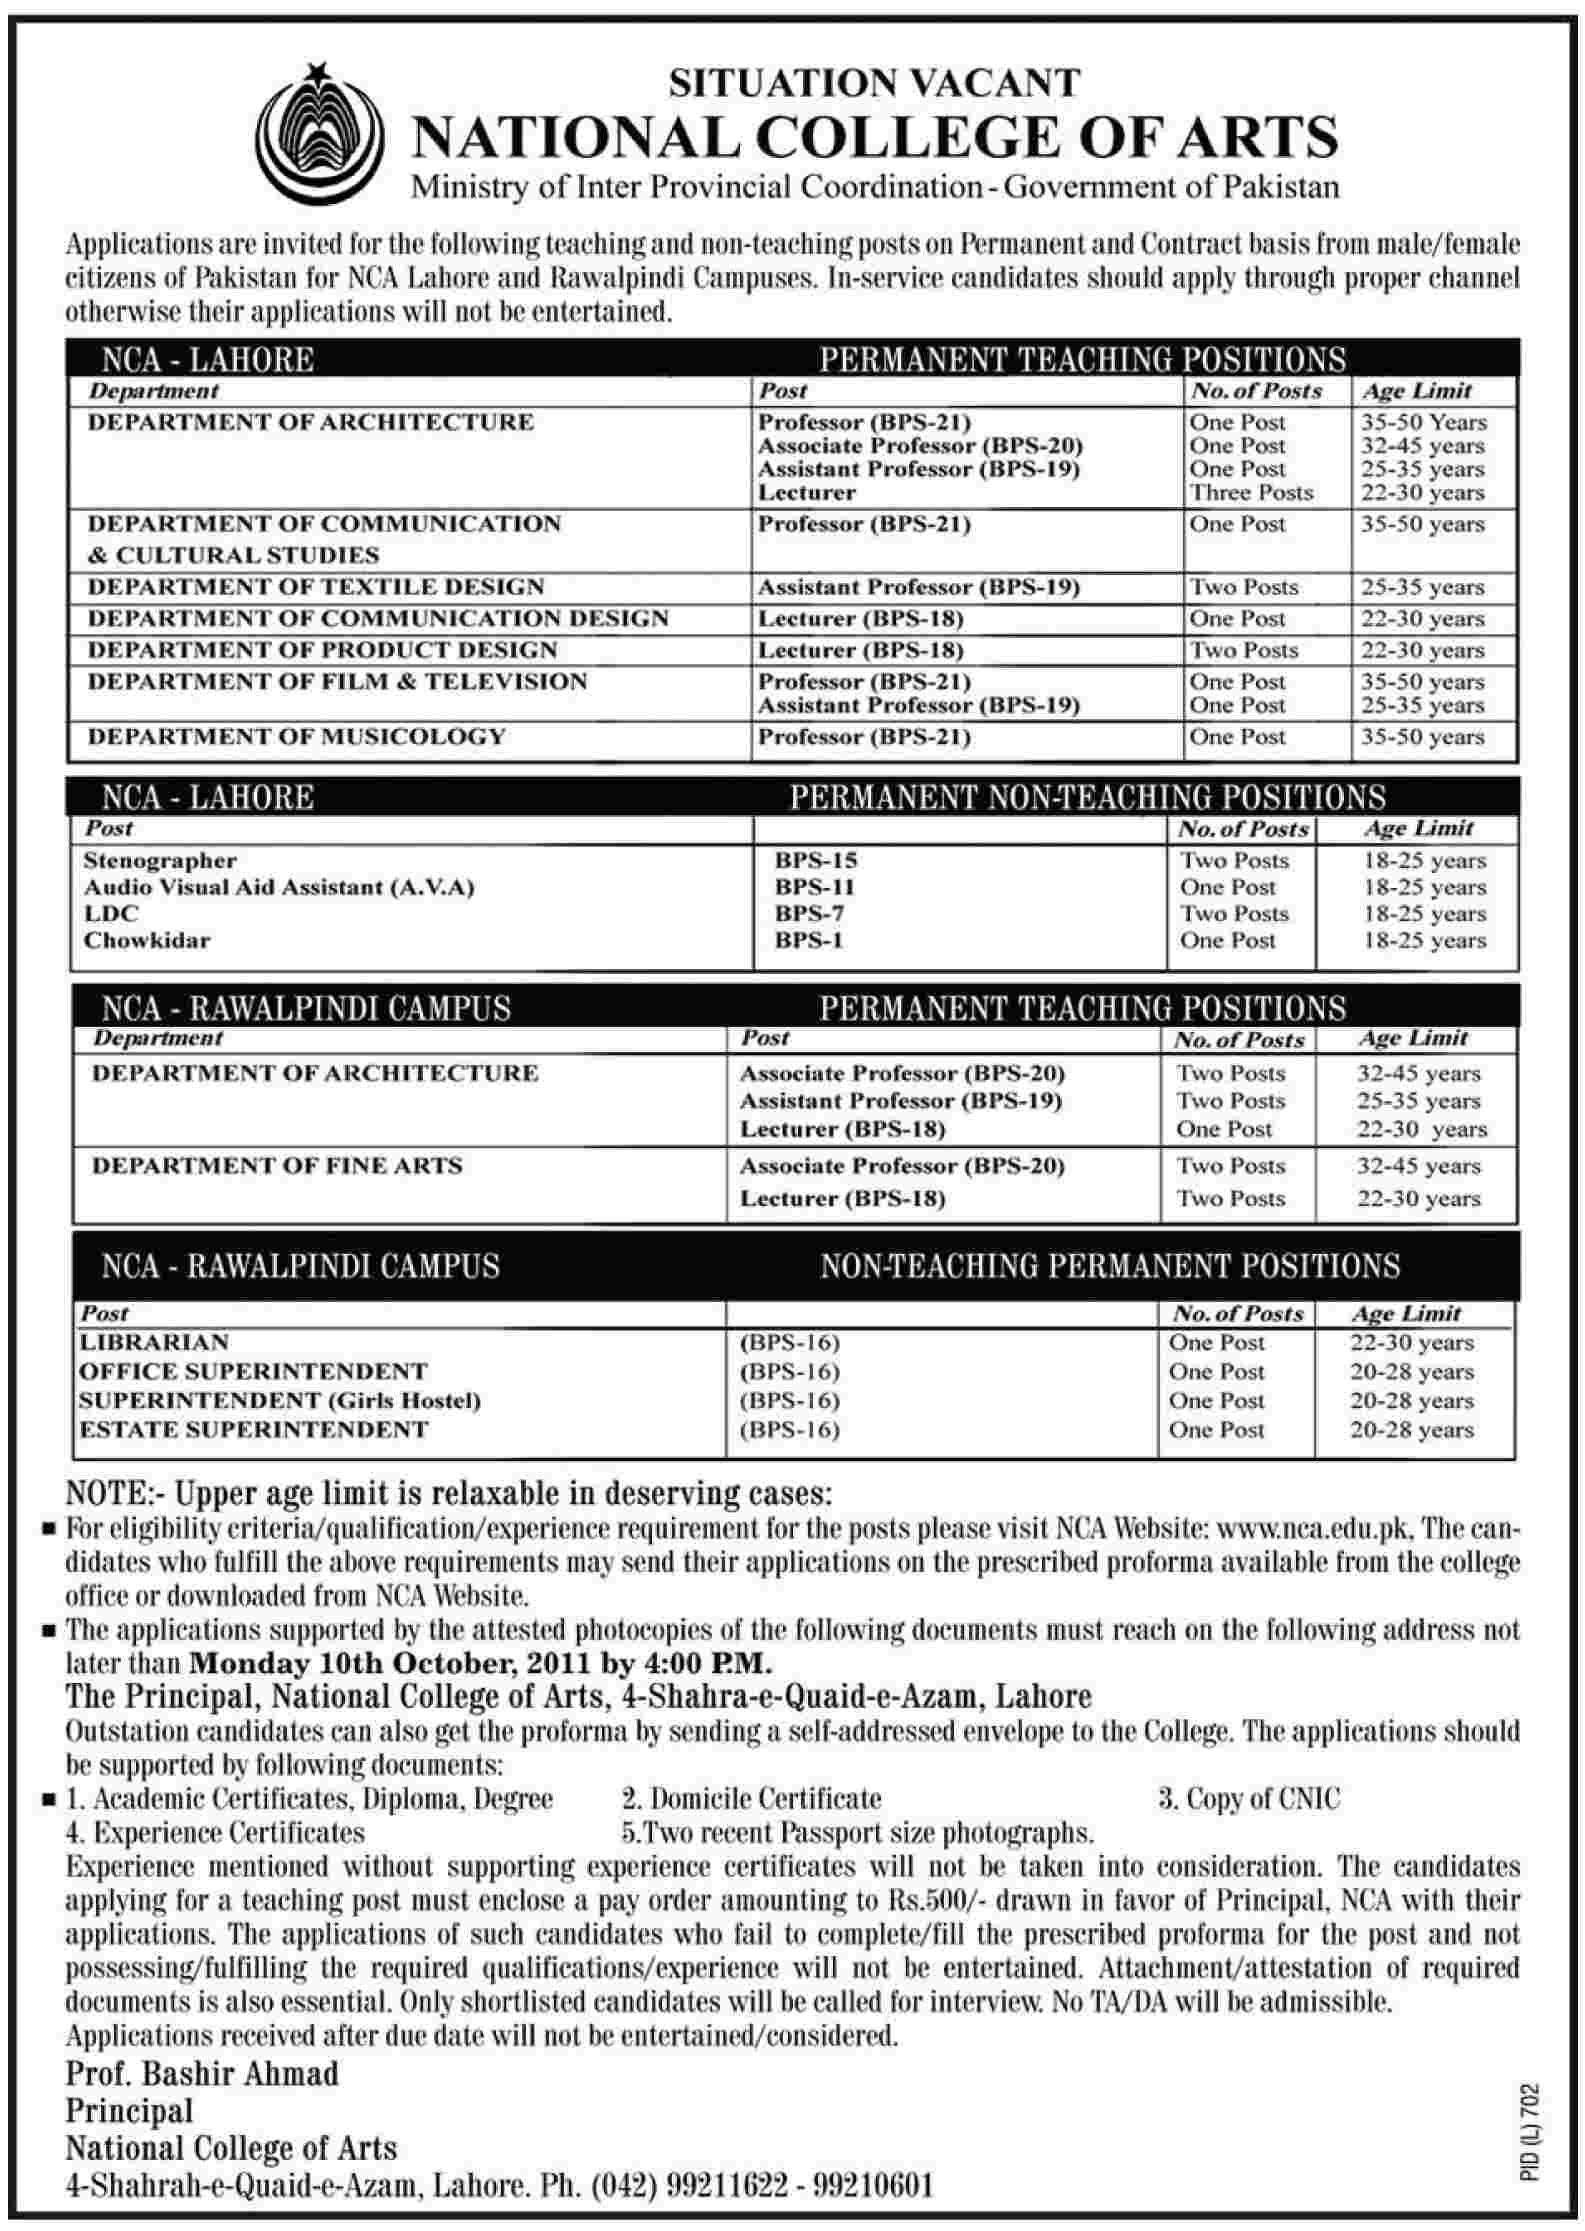 Faculty and Admin Staff Required by National College of Arts